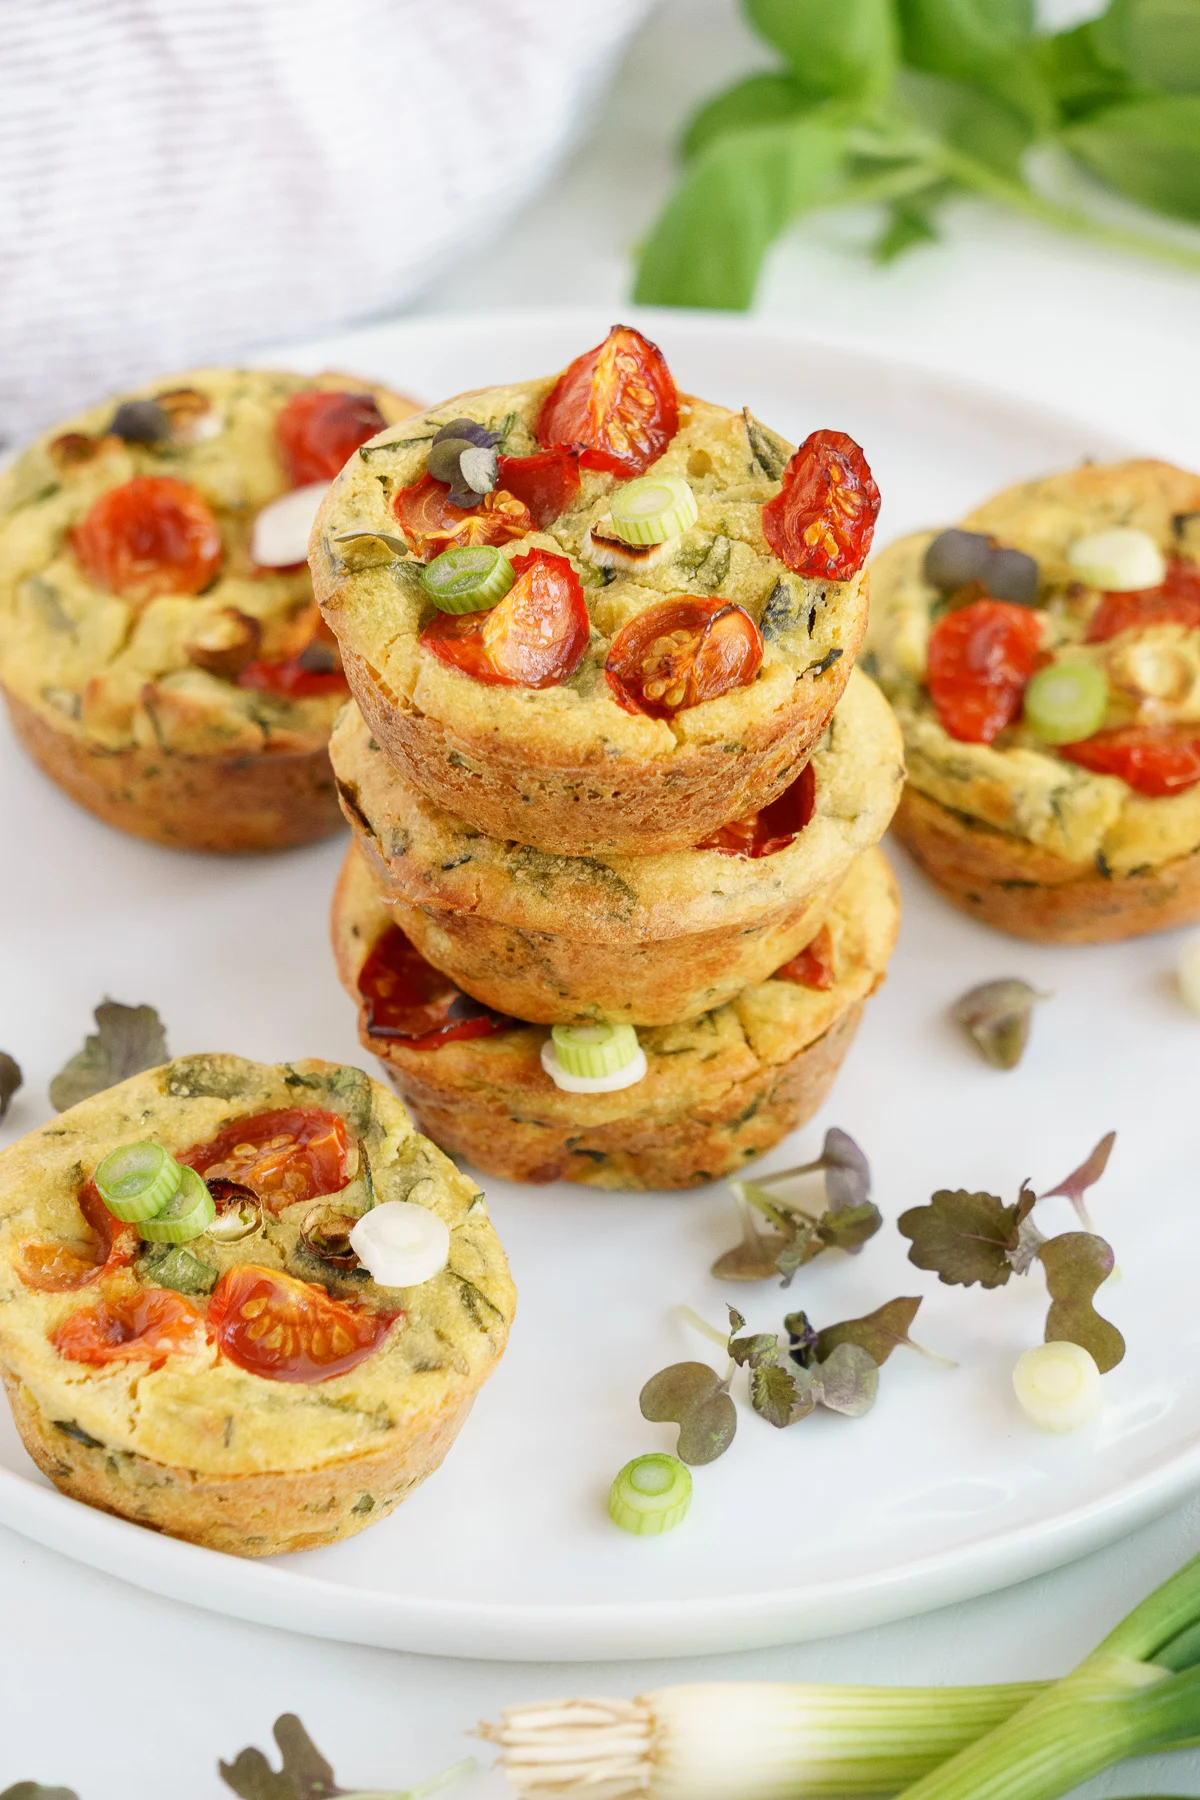 Vegan egg muffins topped with veggies and herbs